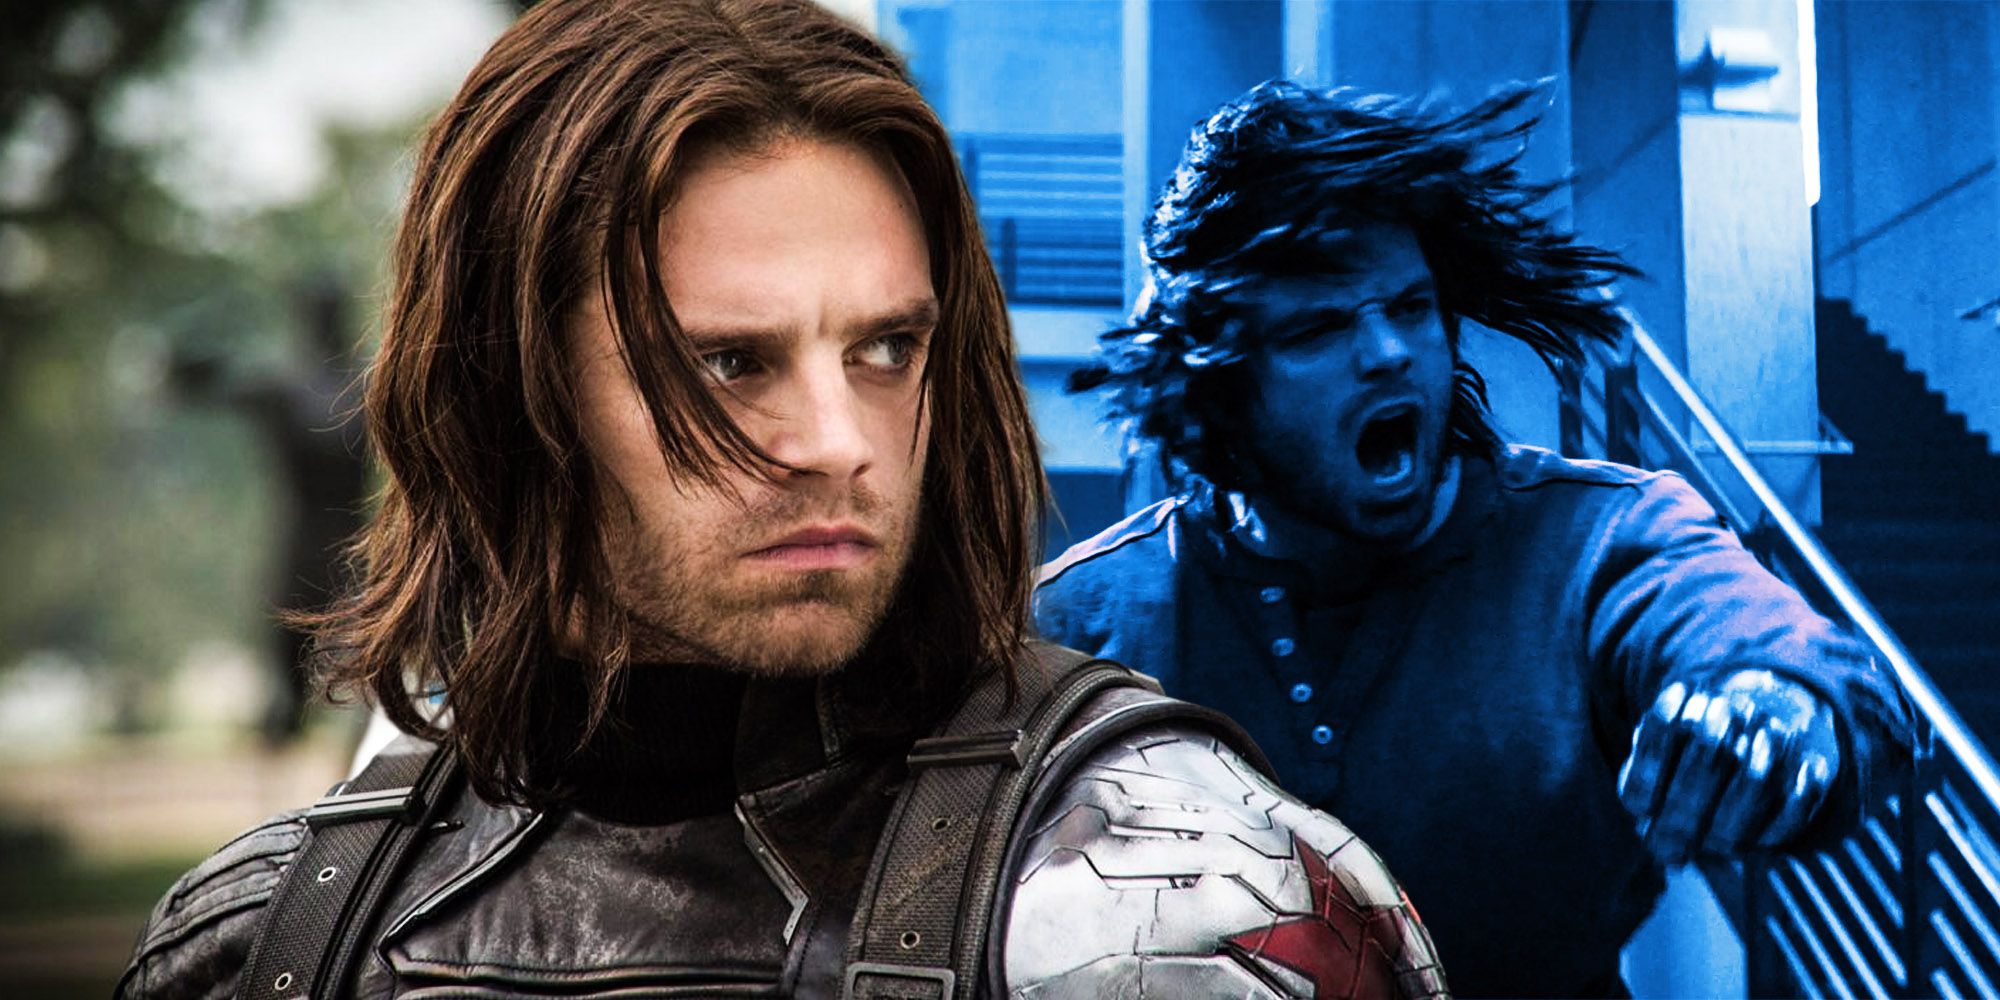 What Martial Arts Does Winter Soldier Use? His Fighting Style Explained